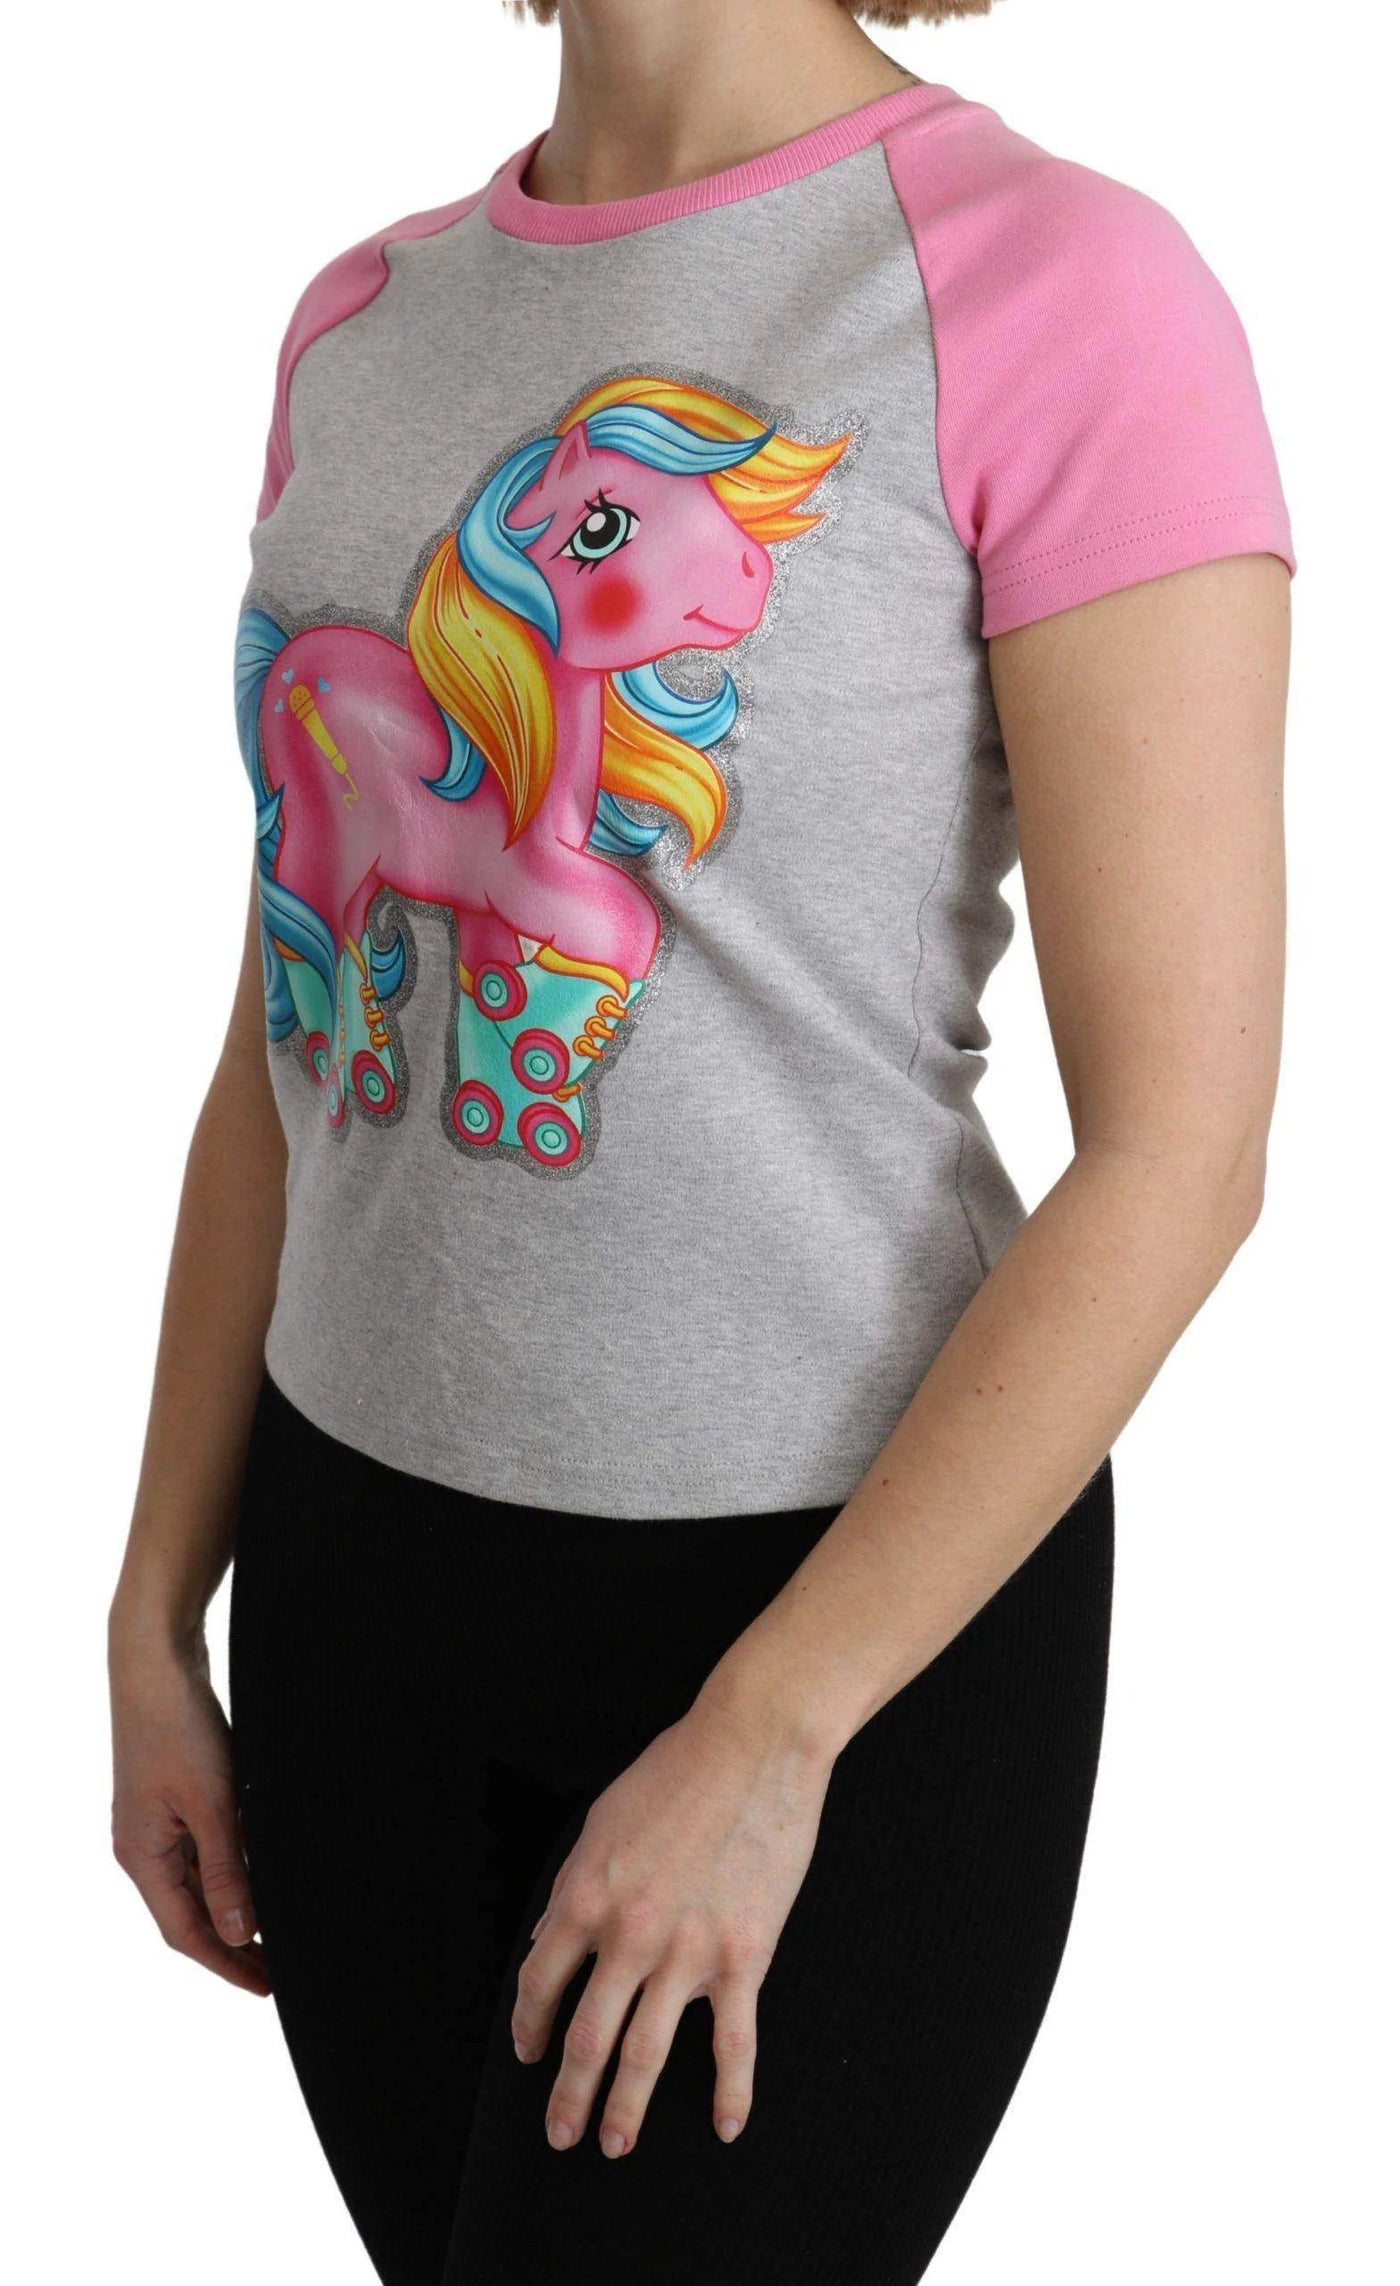 Moschino  and pink Cotton T-shirt My Little Pony Top #women, Catch, feed-agegroup-adult, feed-color-gray, feed-gender-female, feed-size-IT36 | XS, feed-size-IT38|XS, feed-size-IT40|S, feed-size-IT44|L, feed-size-IT46|XL, feed-size-IT48|XXL, Gender_Women, Gray, IT36 | XS, IT38|XS, IT40|S, IT42|M, IT44|L, IT46|XL, IT48|XXL, Kogan, Moschino, Tops & T-Shirts - Women - Clothing, Women - New Arrivals at SEYMAYKA